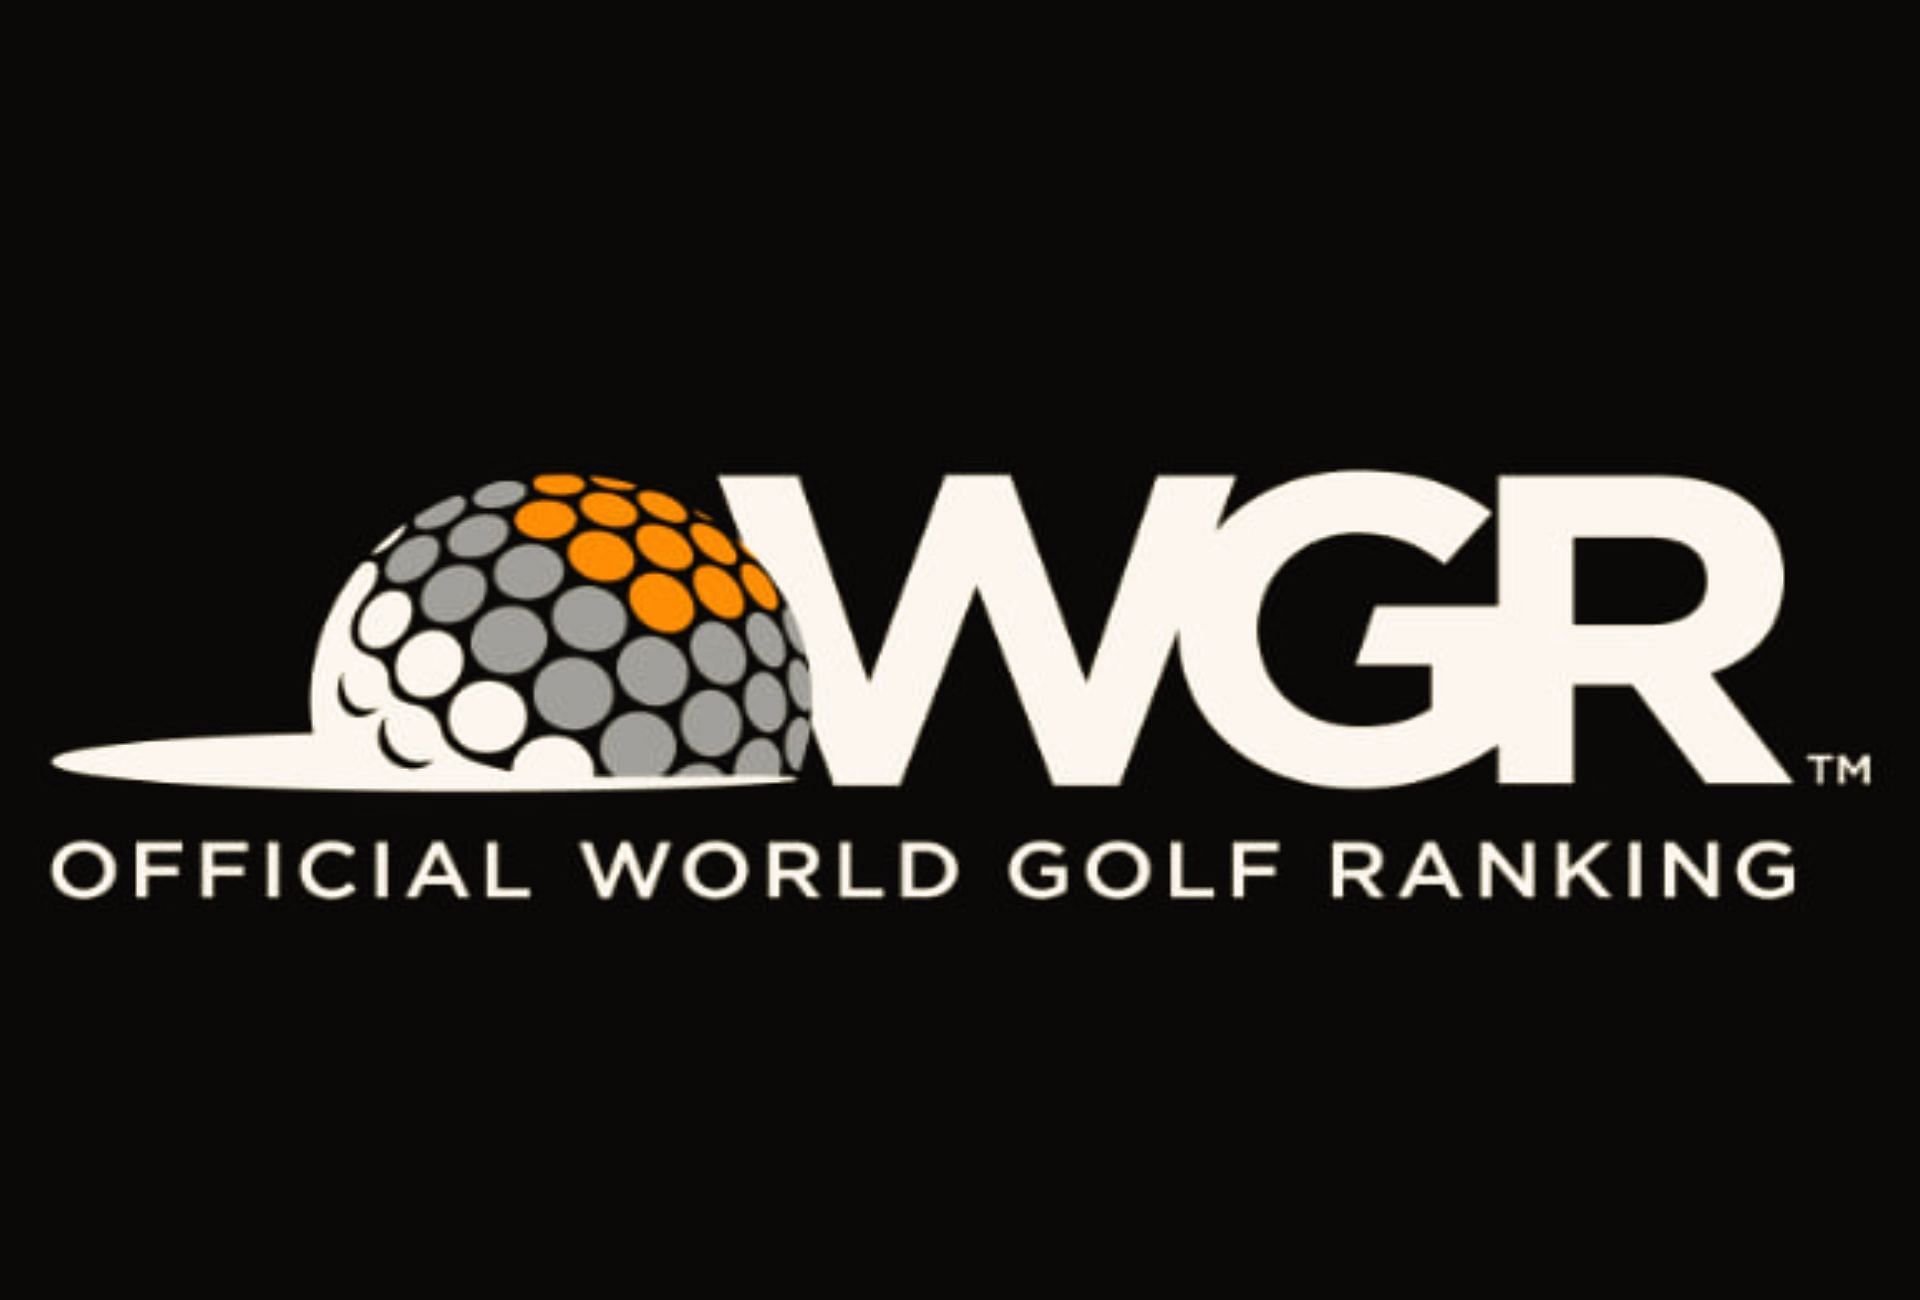 Golf OWGR board announces 2 updates to the ranking system